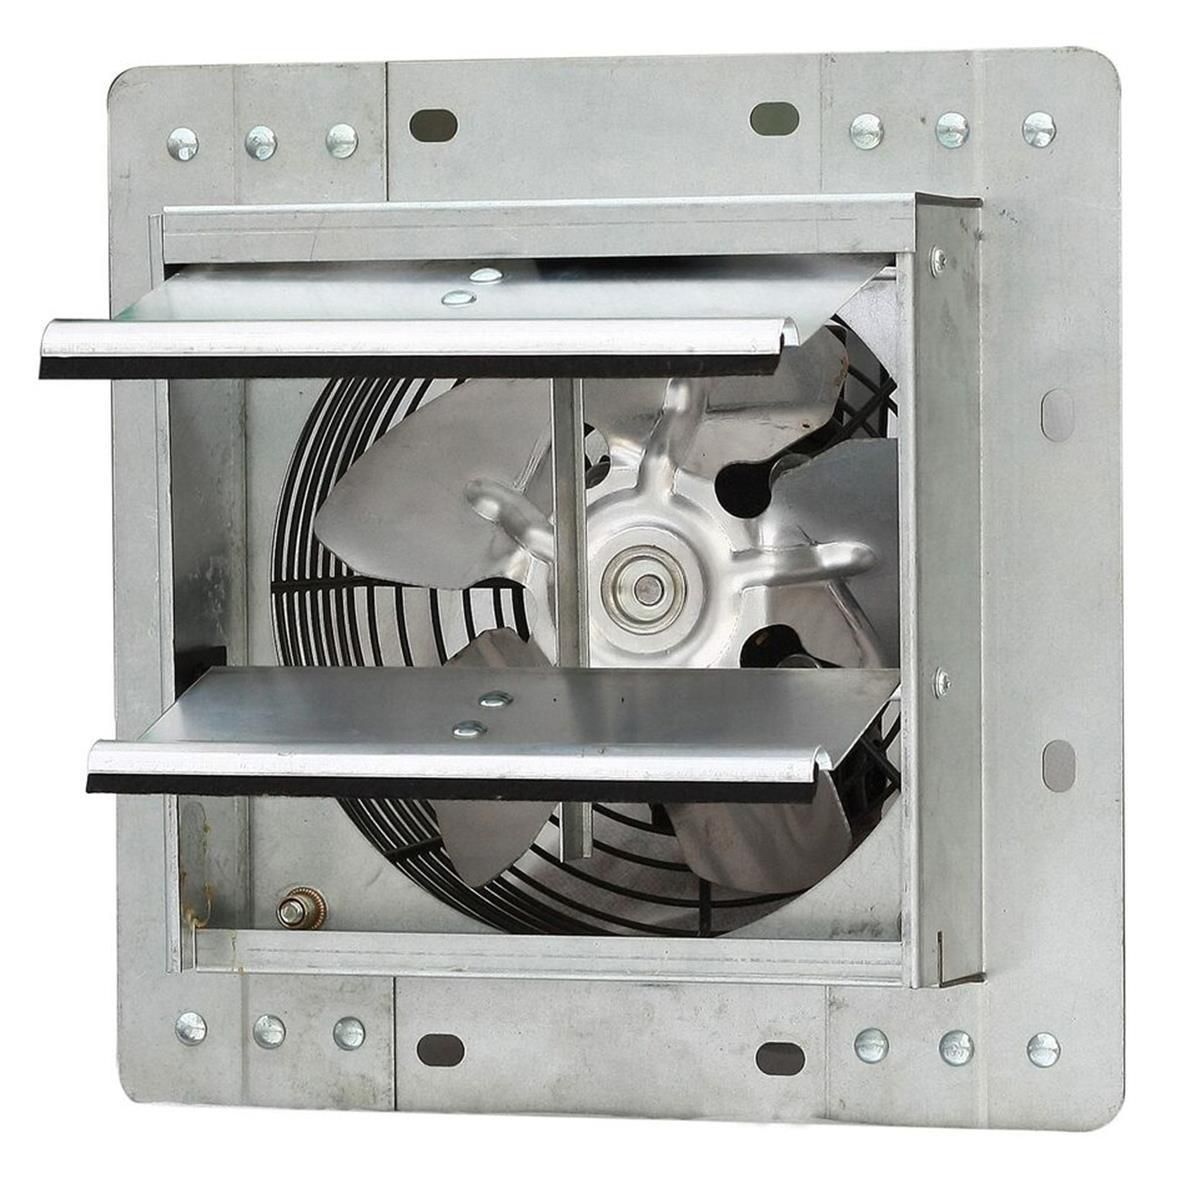 Image for Doctor D Dr. Heater USA ILG8SF7V 7 in. ILiving Speed Shutter Exhaust Fan Crawl Space Ventilator - Wall Mounted, Silver at Kohl's.